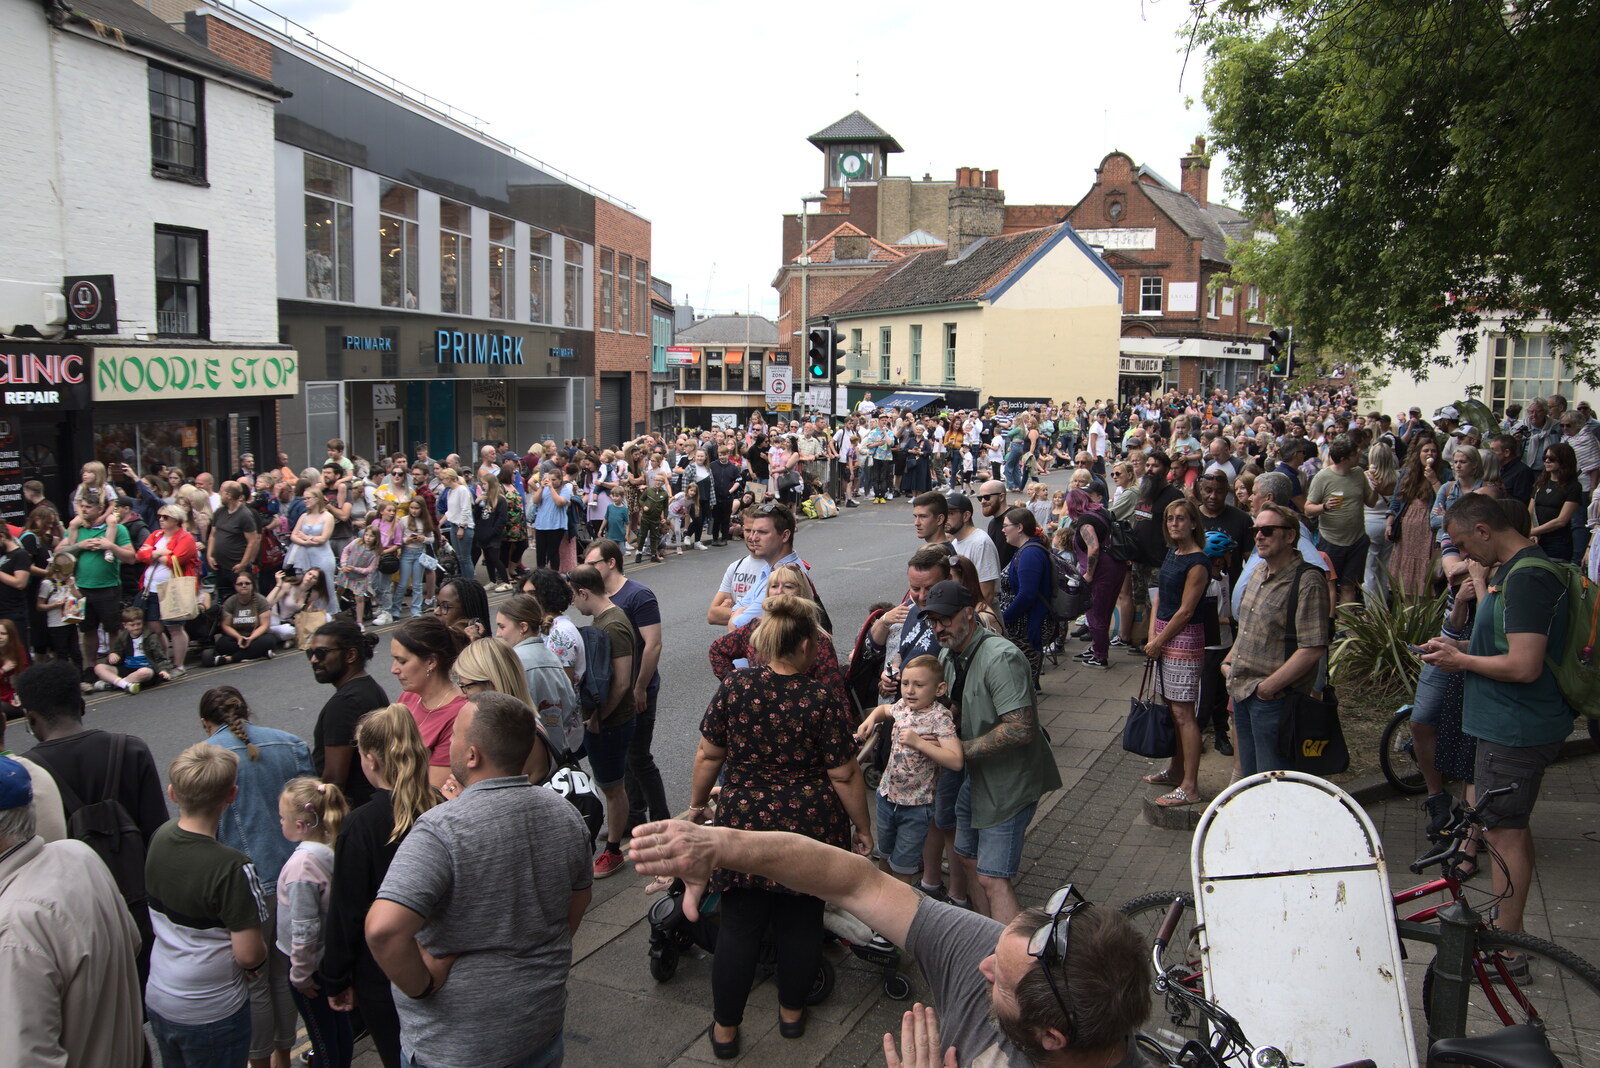 It's getting quite busy on Red Lion Street from The Lord Mayor's Procession, Norwich, Norfolk - 2nd July 2022